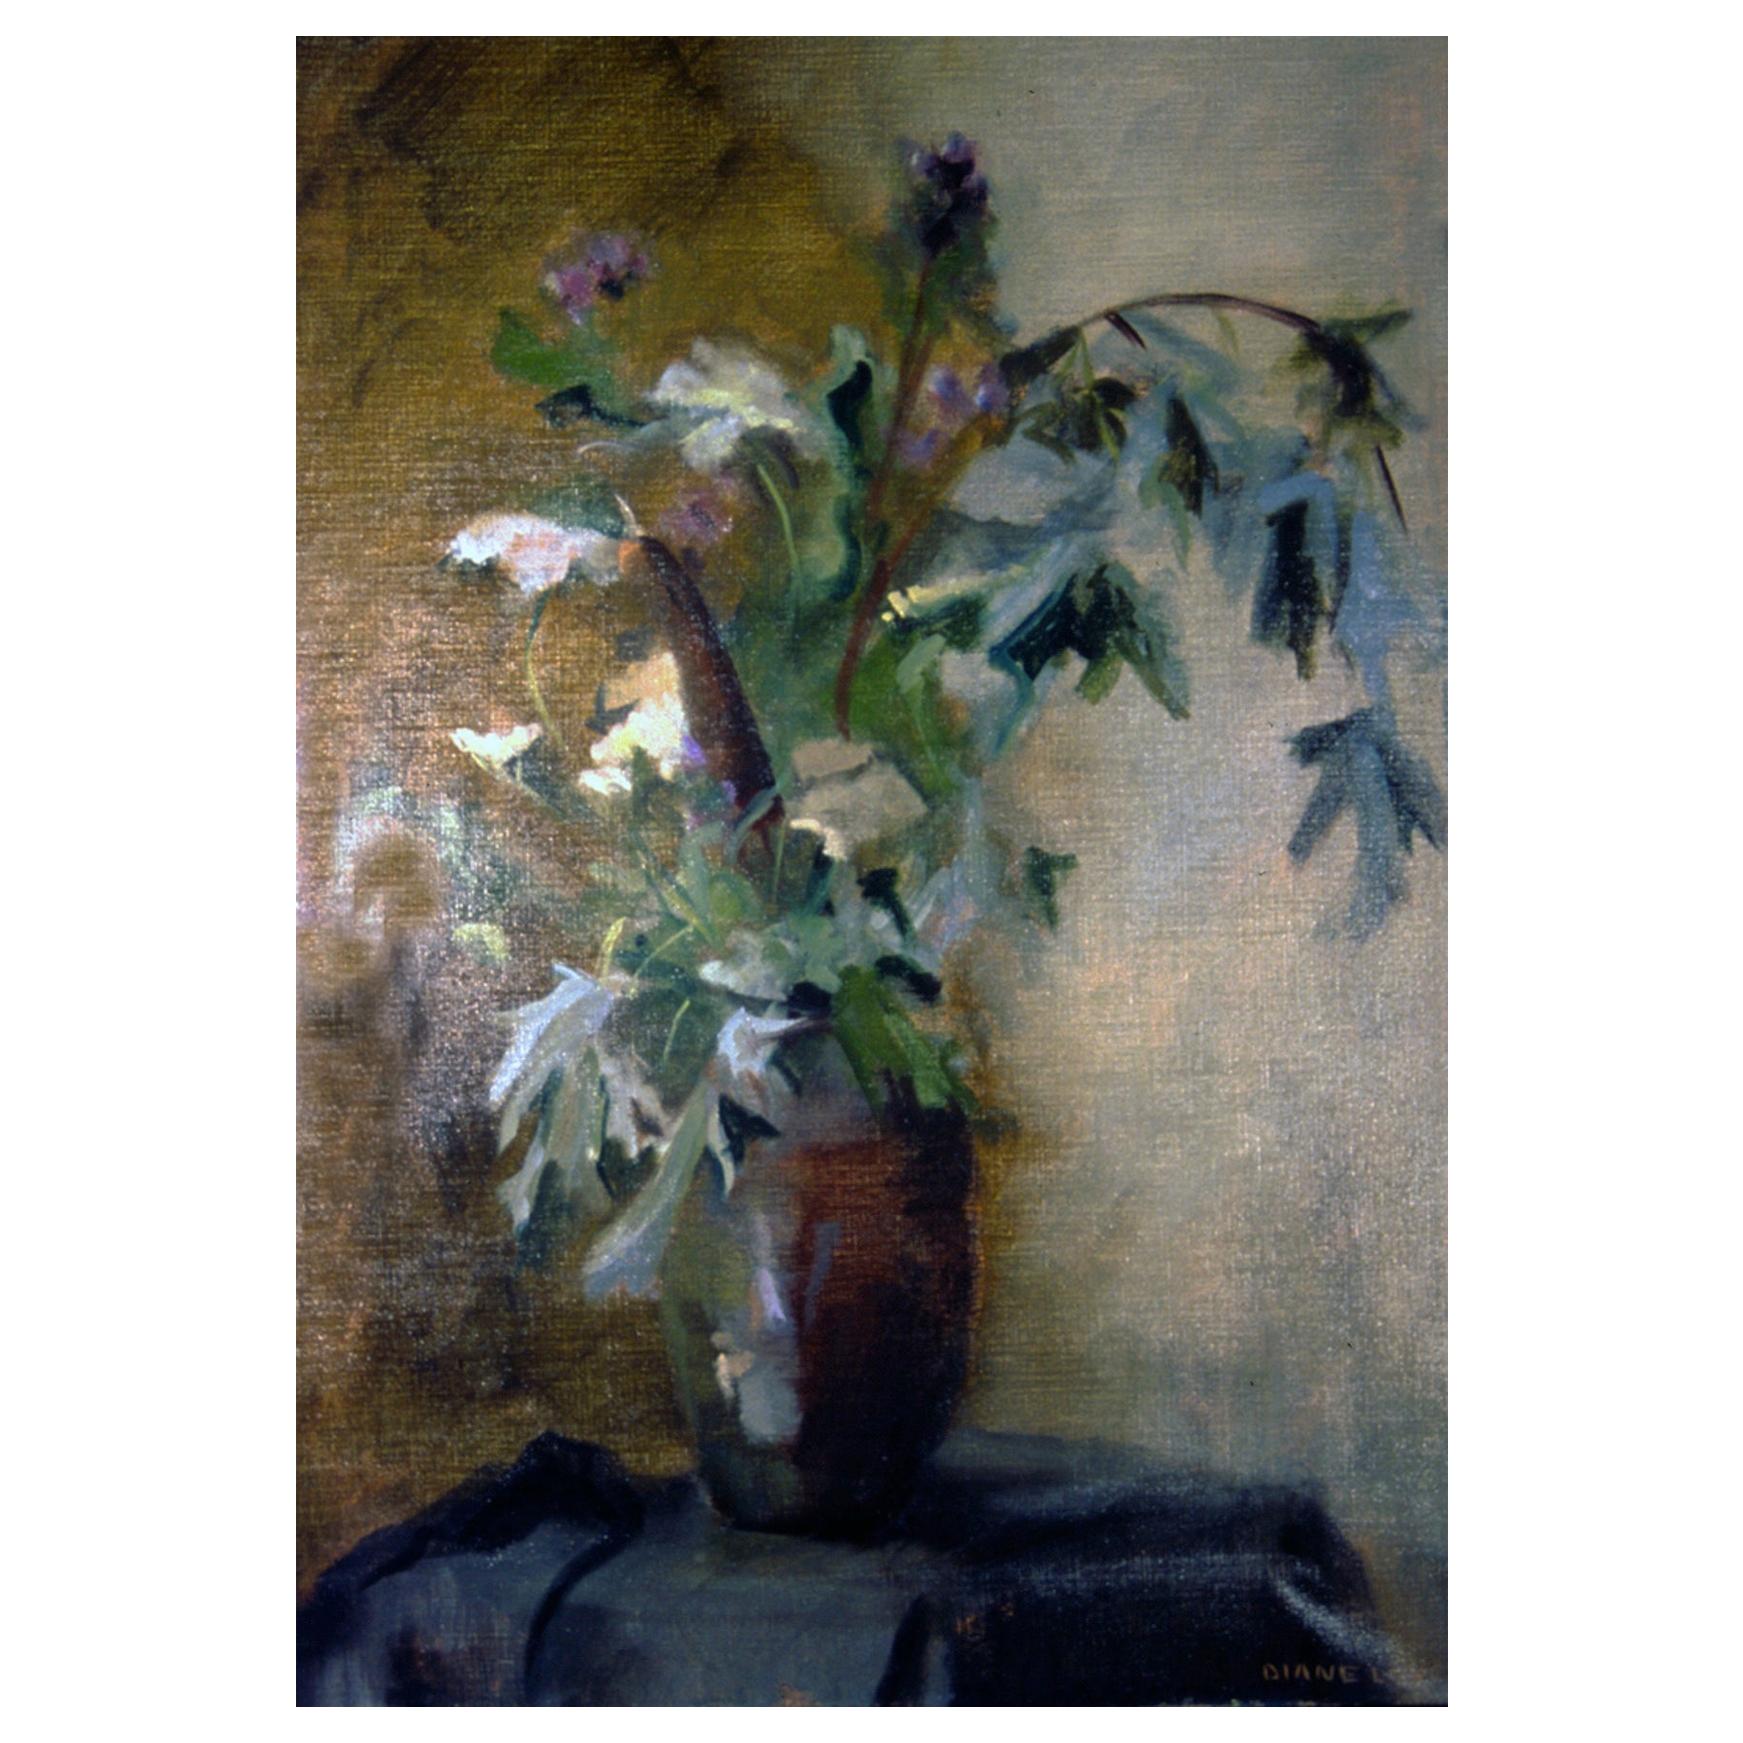 "Maple Fall," 1989 Floral Still-Life Oil on Canvas by Diane Love